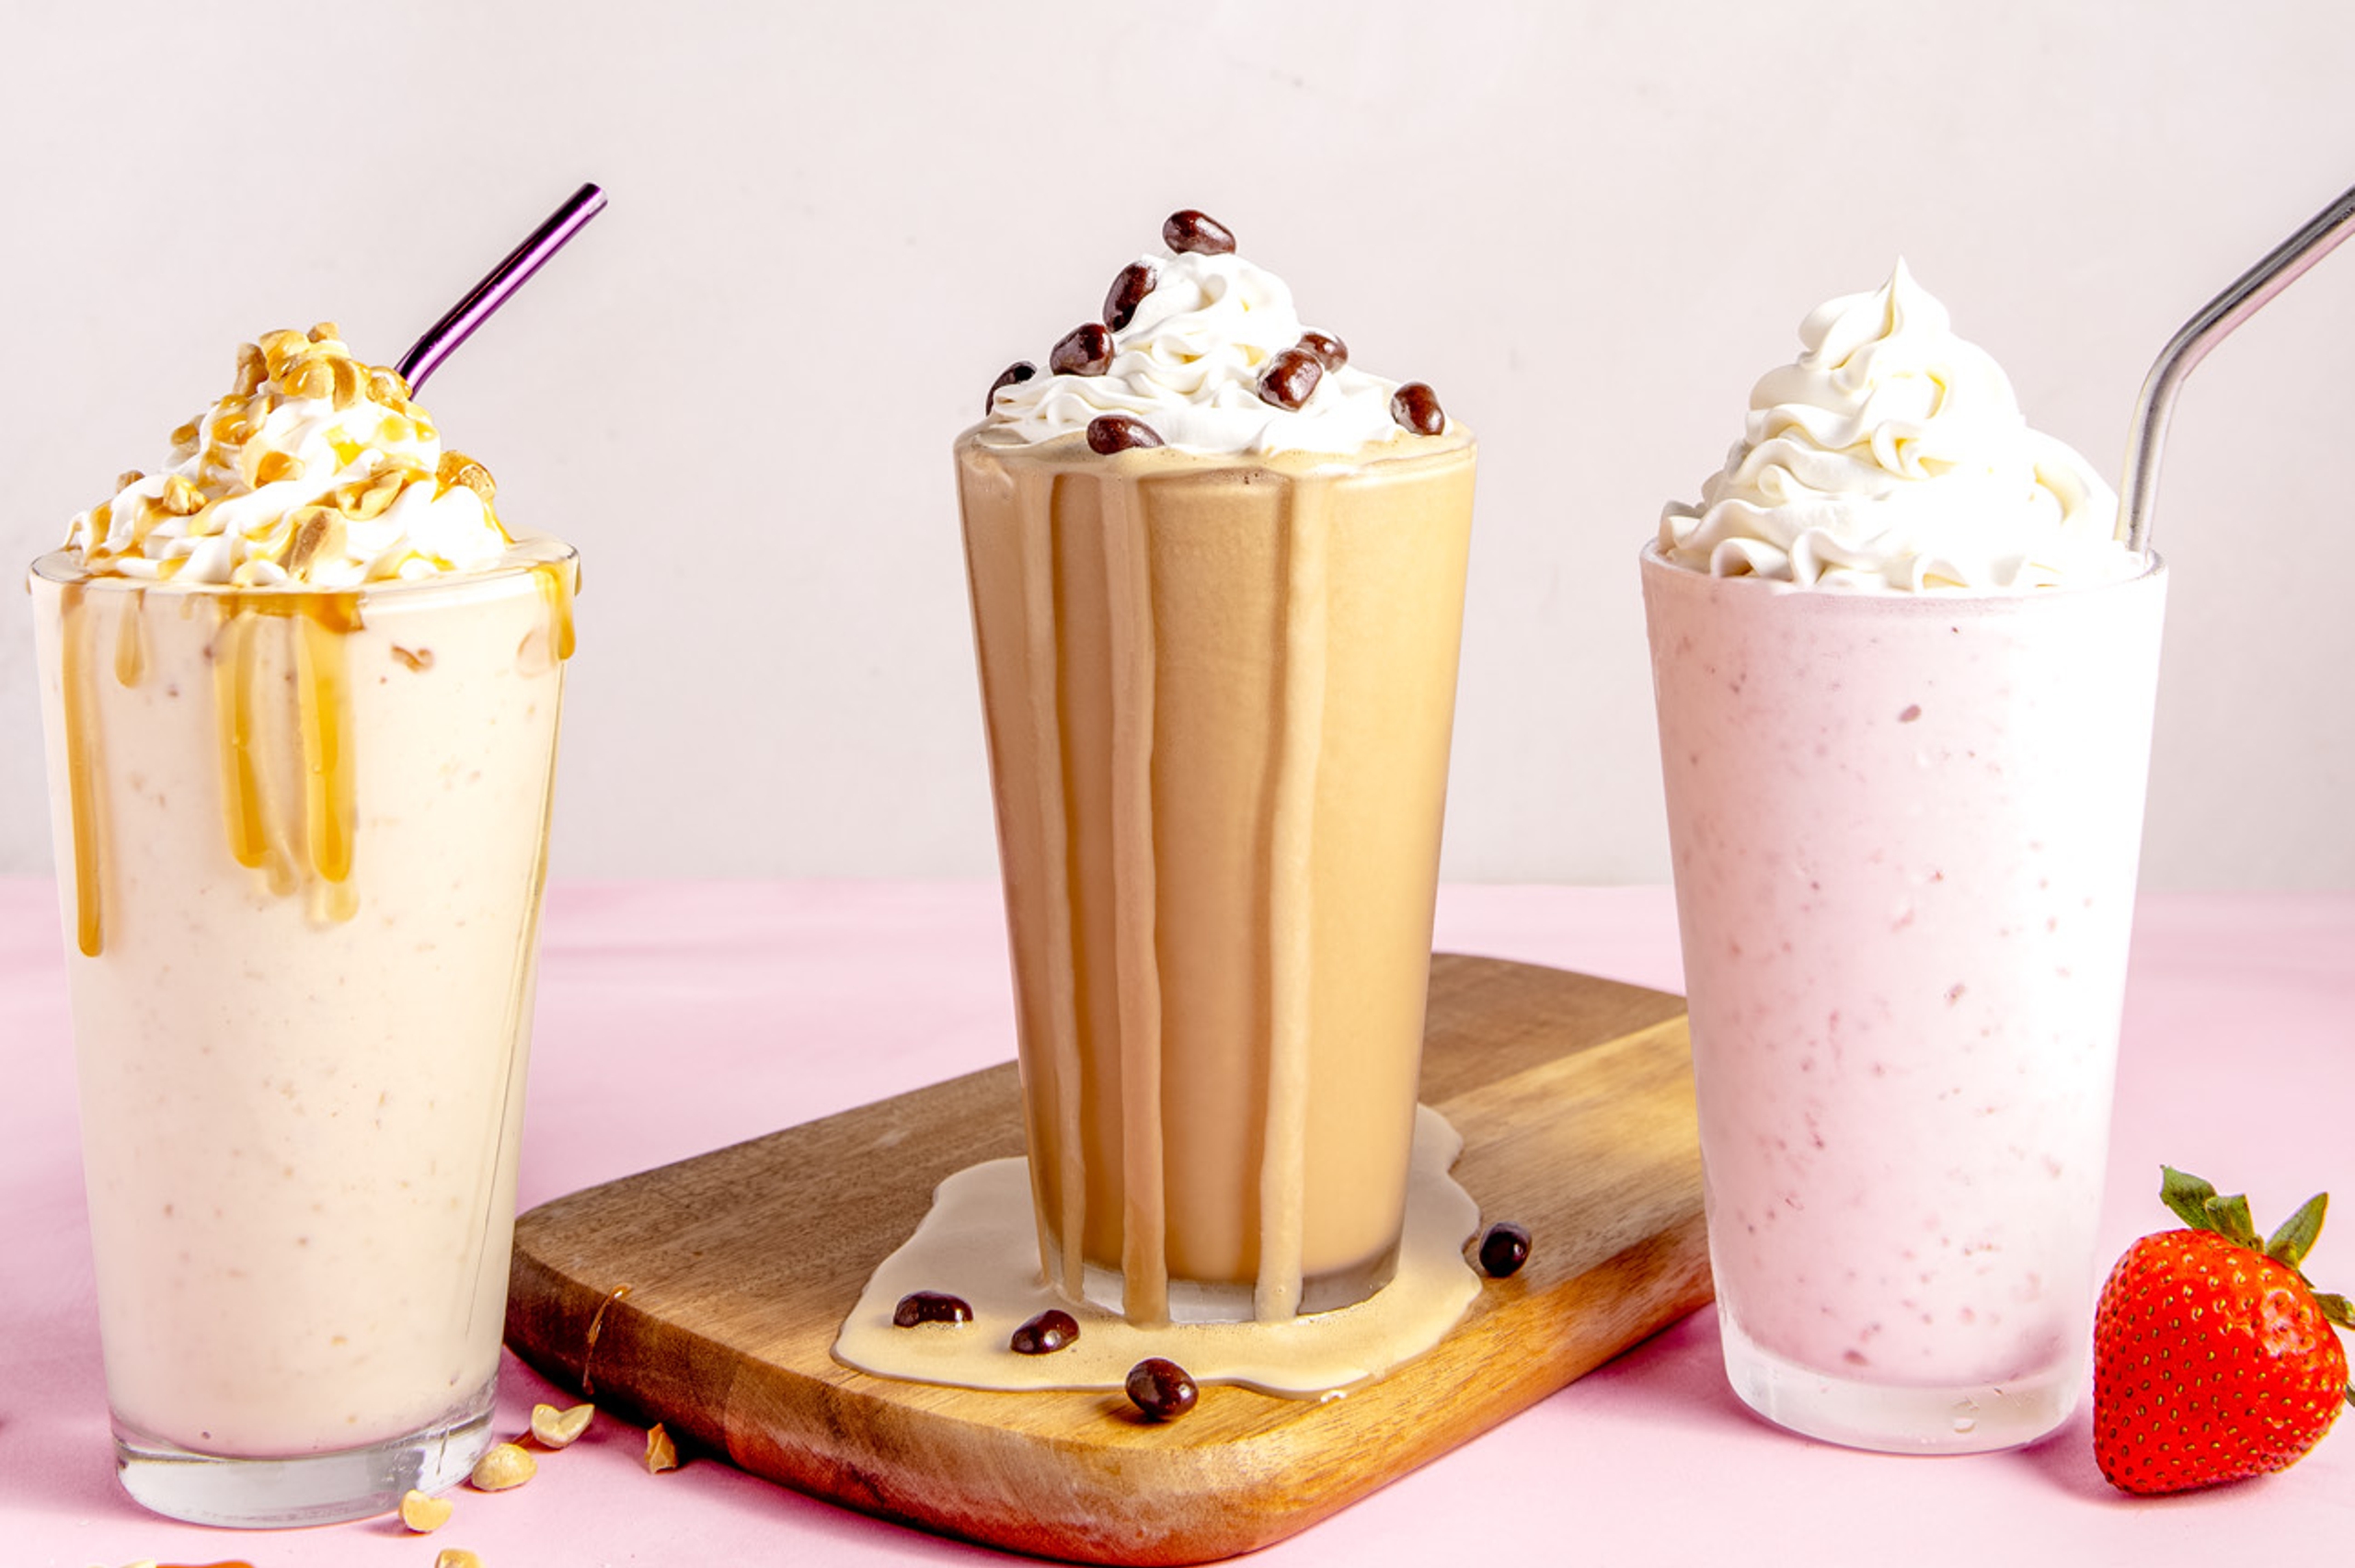 Shakes & Sweets